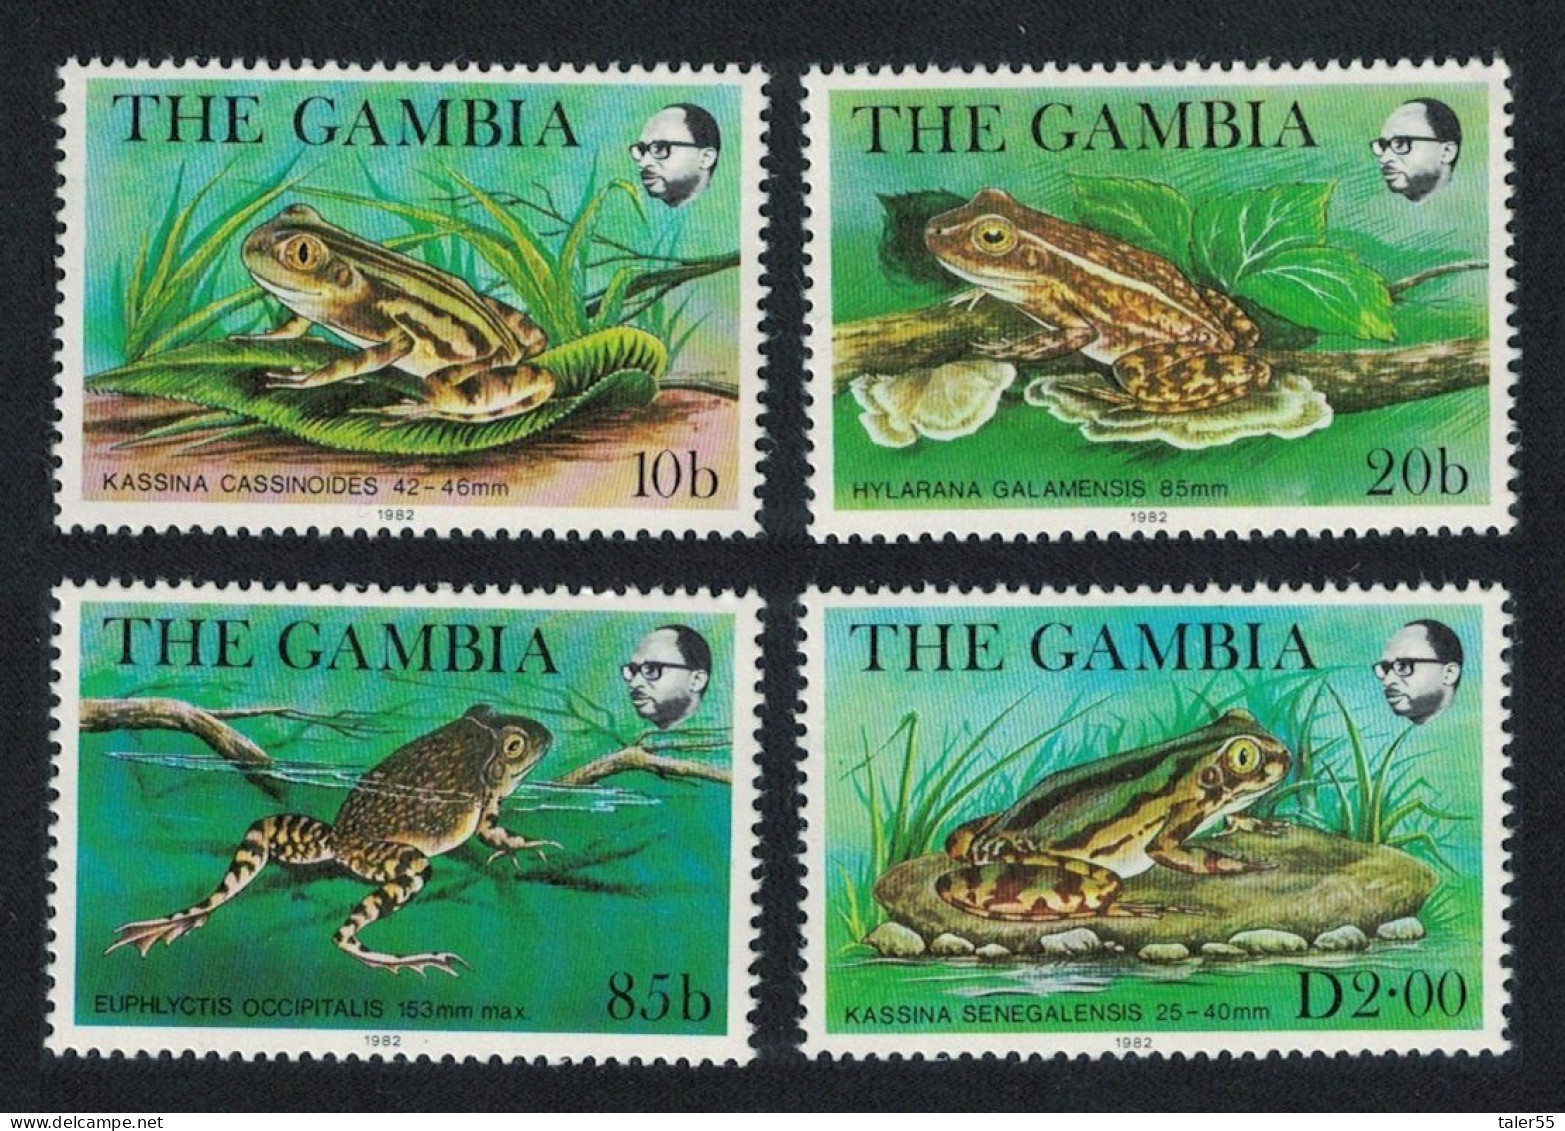 Gambia Frogs 4v 1982 MNH SG#484-487 - Gambia (1965-...)